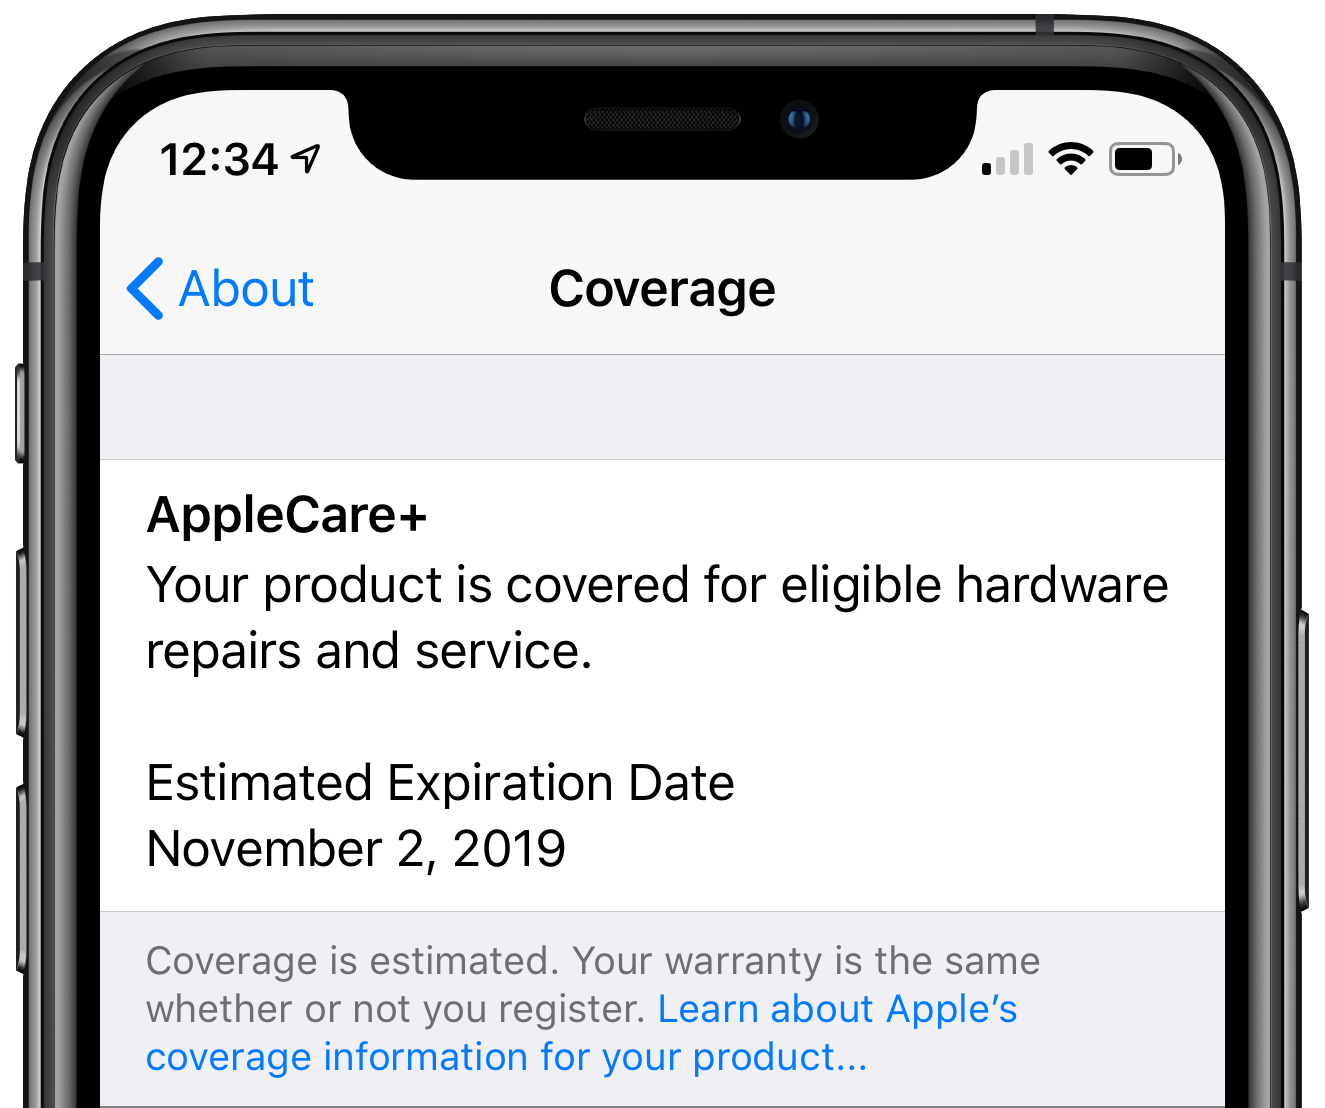 how long do i have to purchase applecare for macbook pro